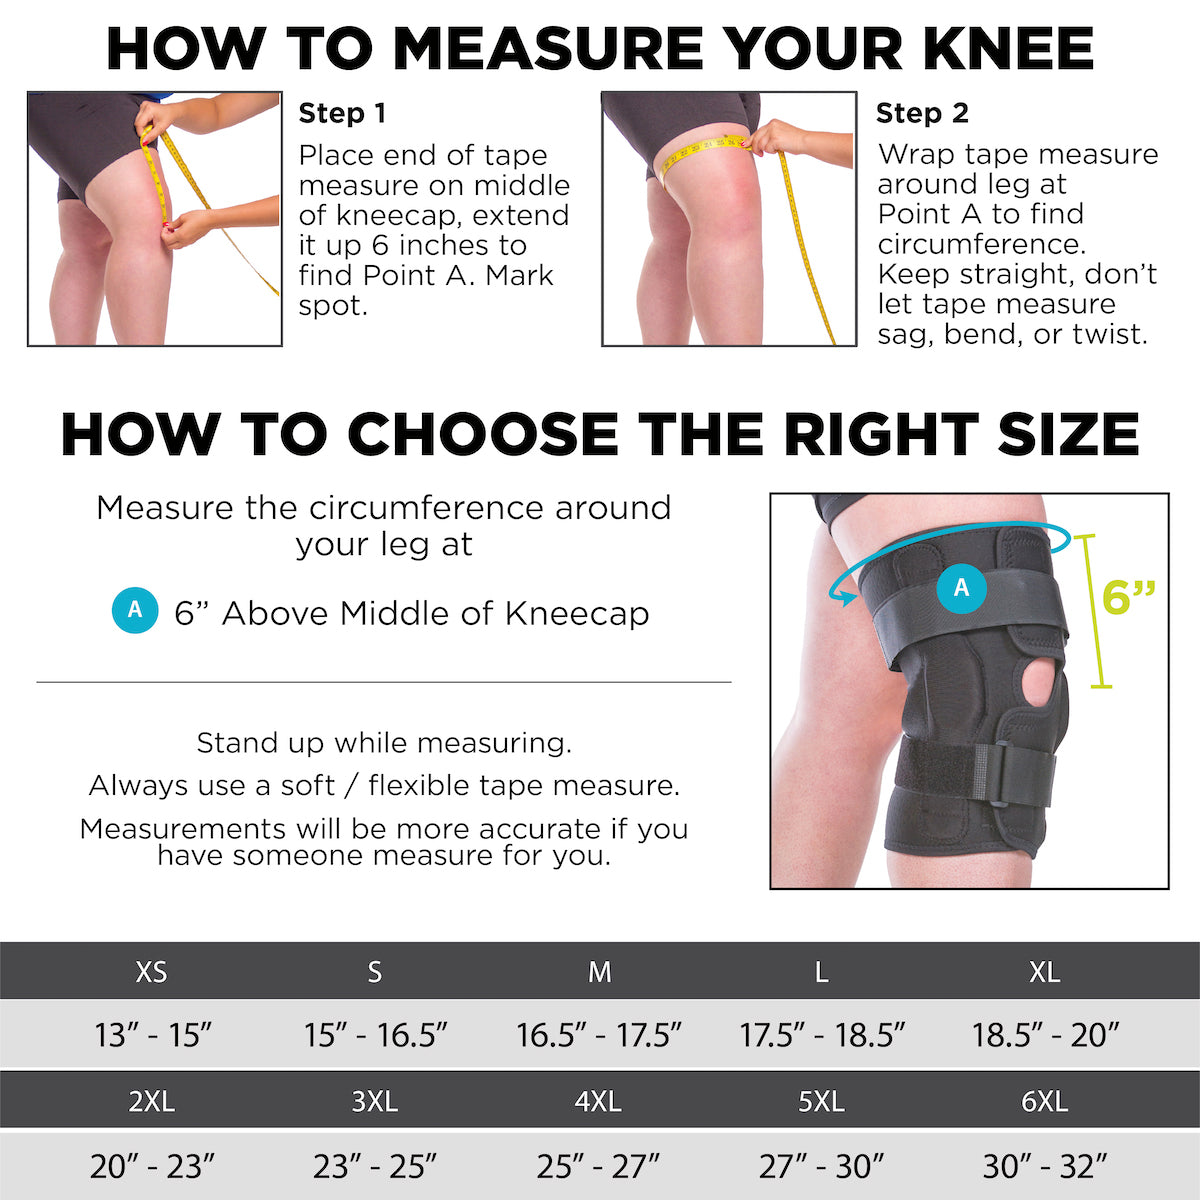 How to Measure Pants Size, This infographic is meant to hel…